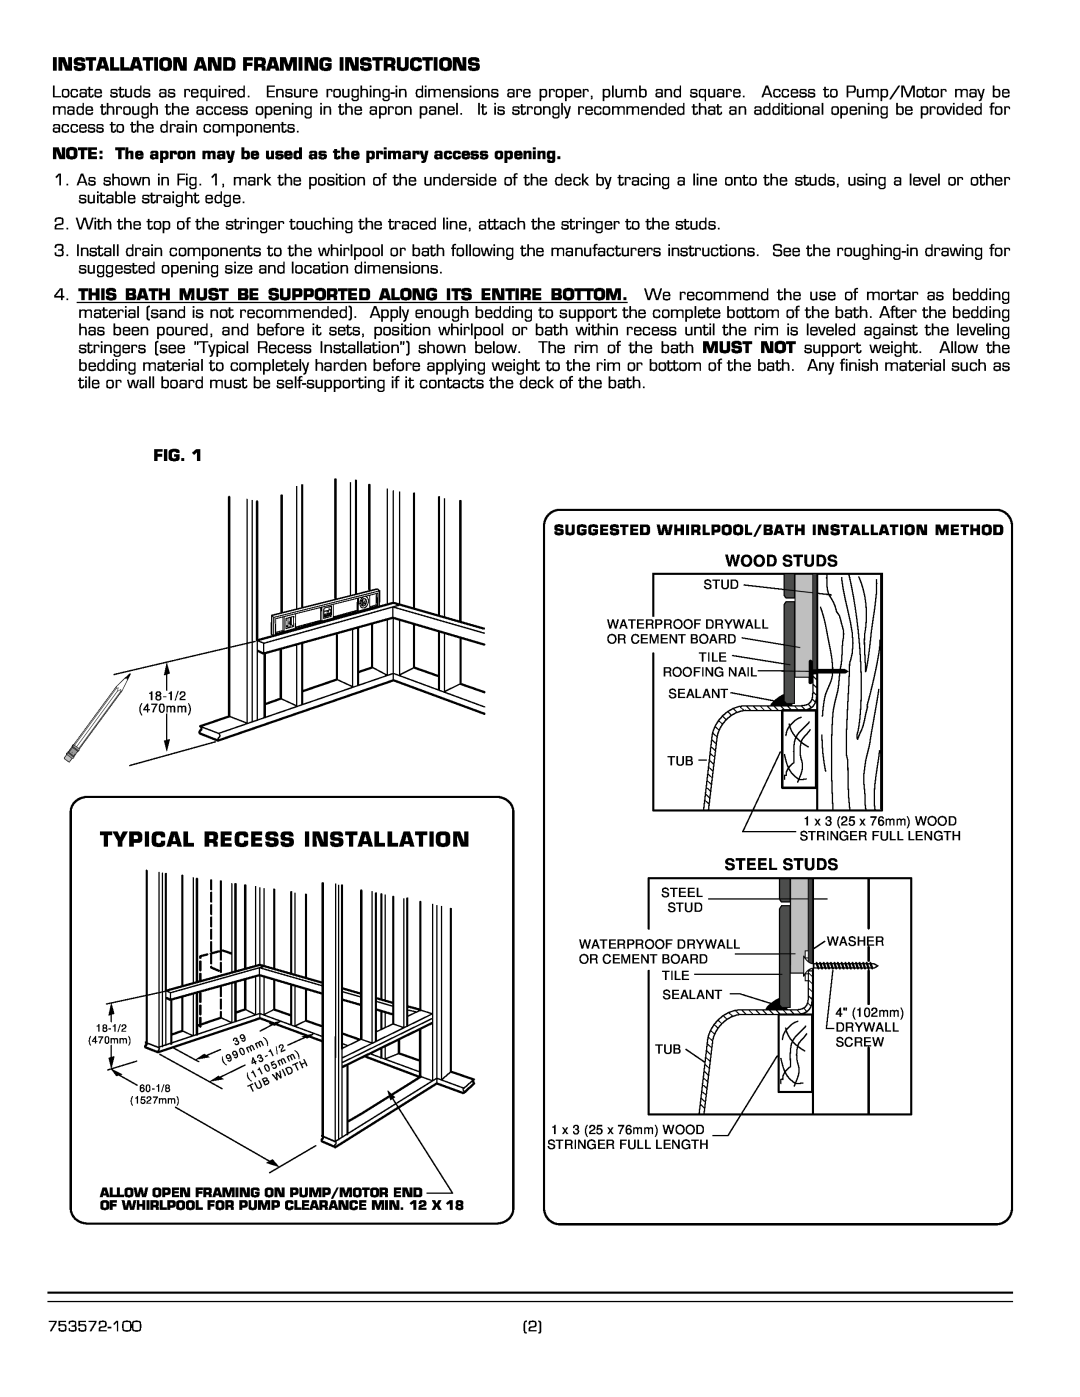 American Standard 1749 SERIES Installation And Framing Instructions, Wood Studs, Steel Studs, Typical Recess Installation 